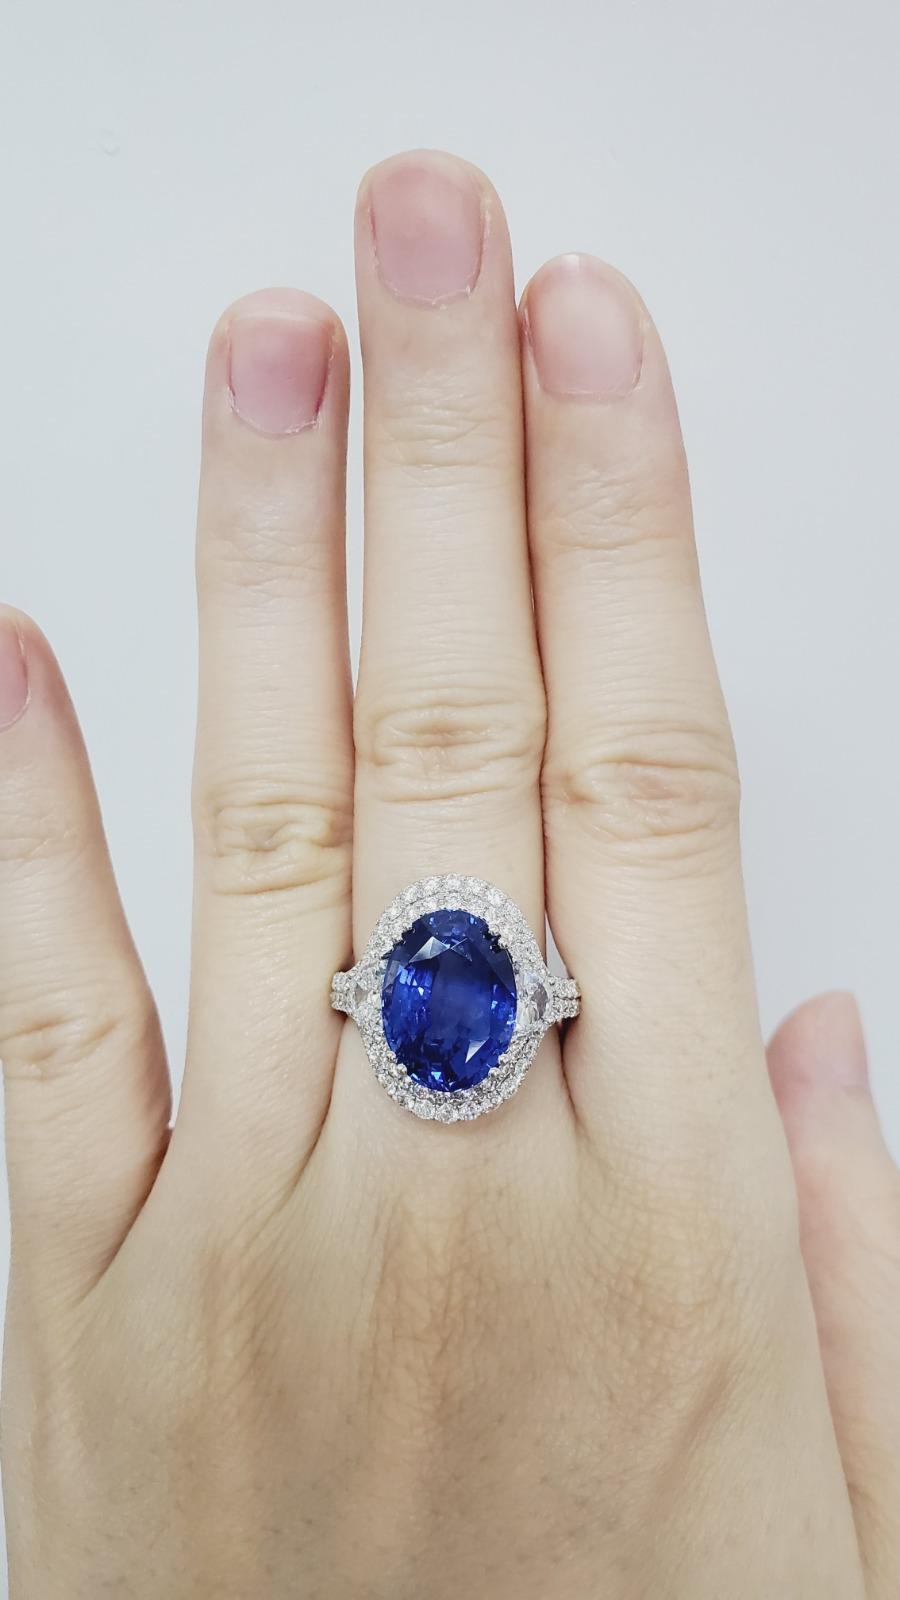 Set with an oval-shaped sapphire weighing 10.01 carats, showing no indication of heating and of Madagascar origin, surrounded by sparkling diamonds, mounted in 18k white gold for a breathtaking and timeless ring. The sapphire stone is certified GRS